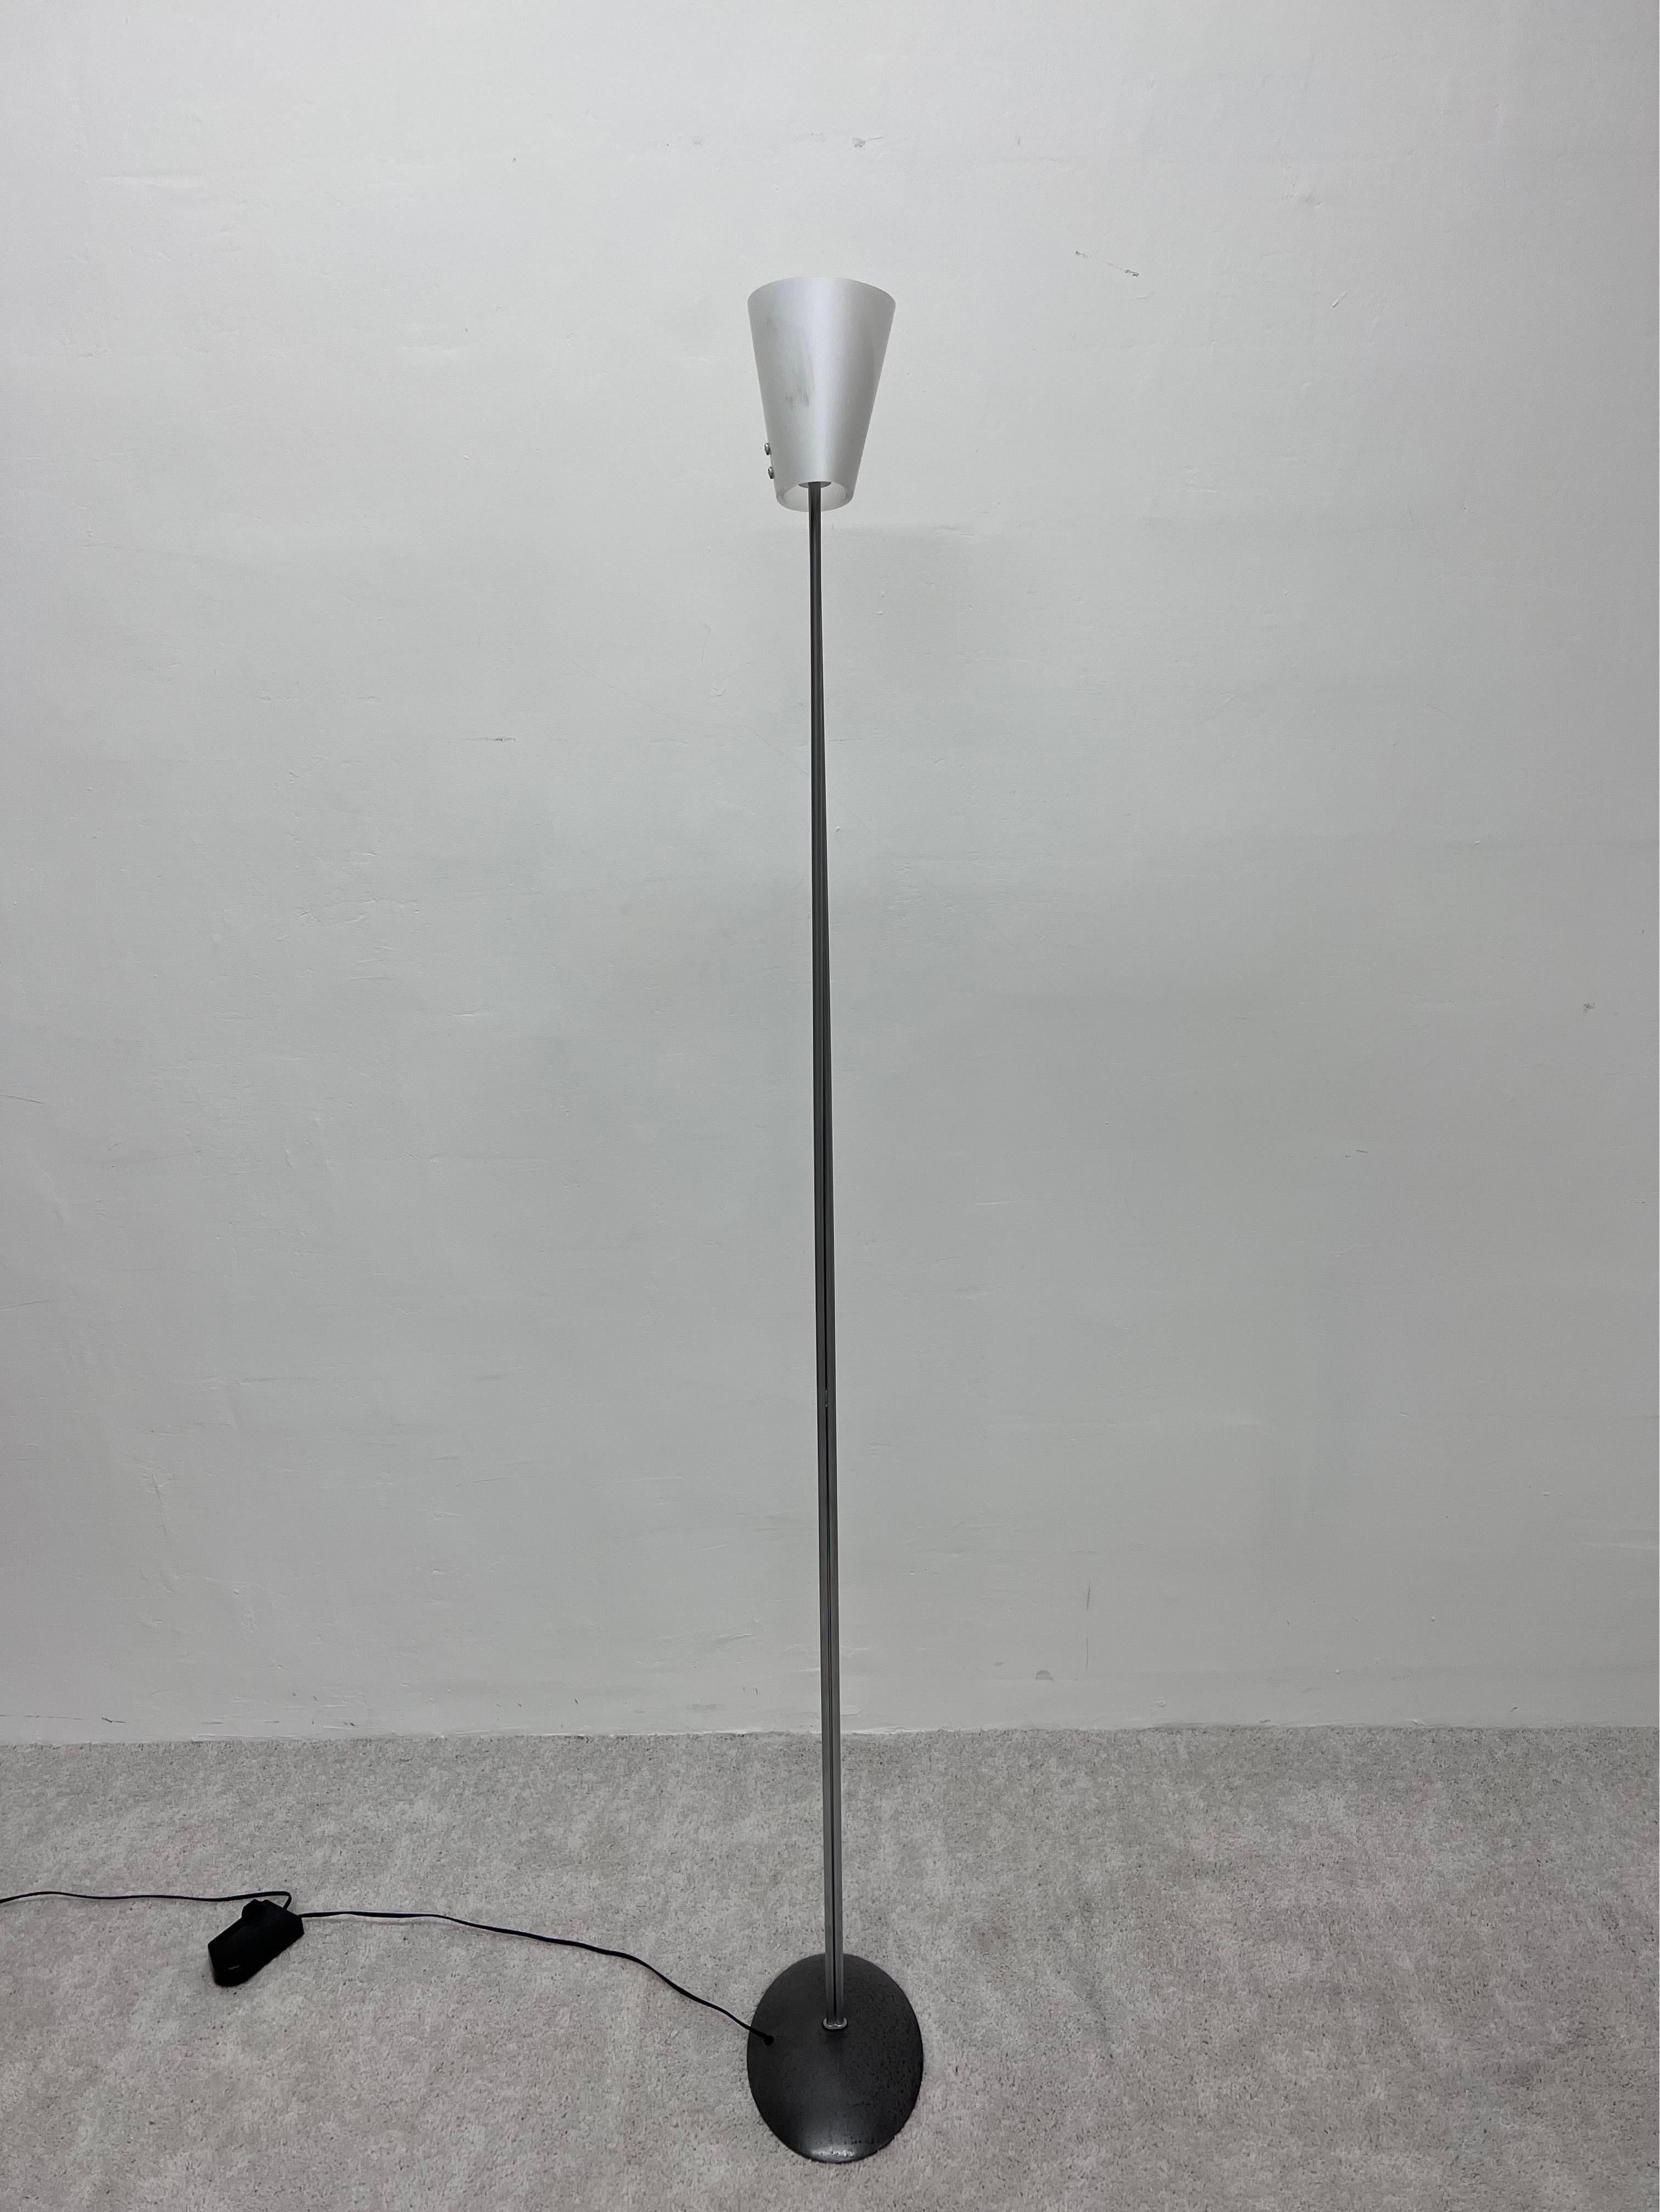 Vitt Terra dimmable floor lamp with gray steel base and stem connecting a white Murano glass shade by Valerio Bottin for Foscarini.